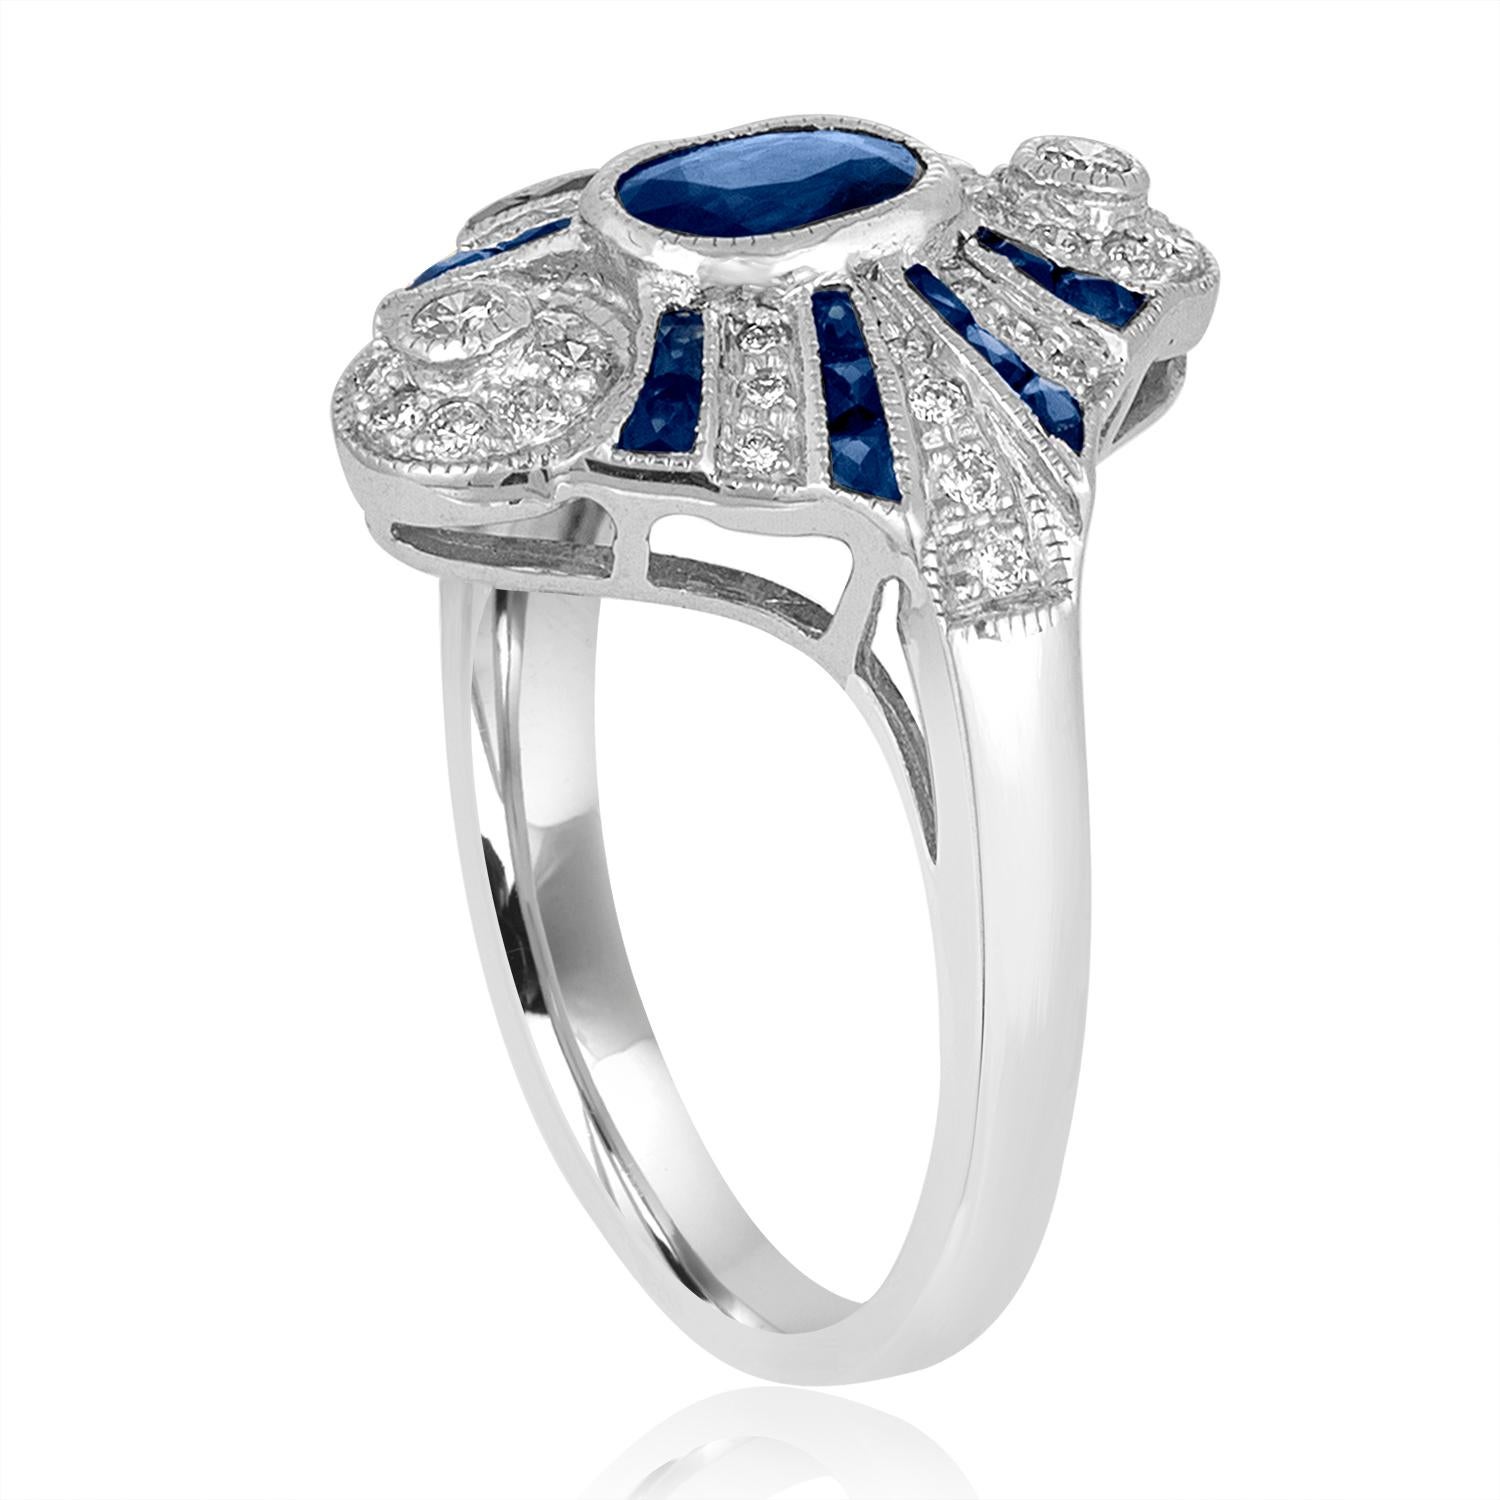 Art Deco Revival Style Ring
The ring is 18K White Gold
There are 0.50 Carats in Diamonds H SI
There are 0.70 Carats in Blue Sapphires
The ring is a size 6.75, sizable
The ring weighs 6.4 grams